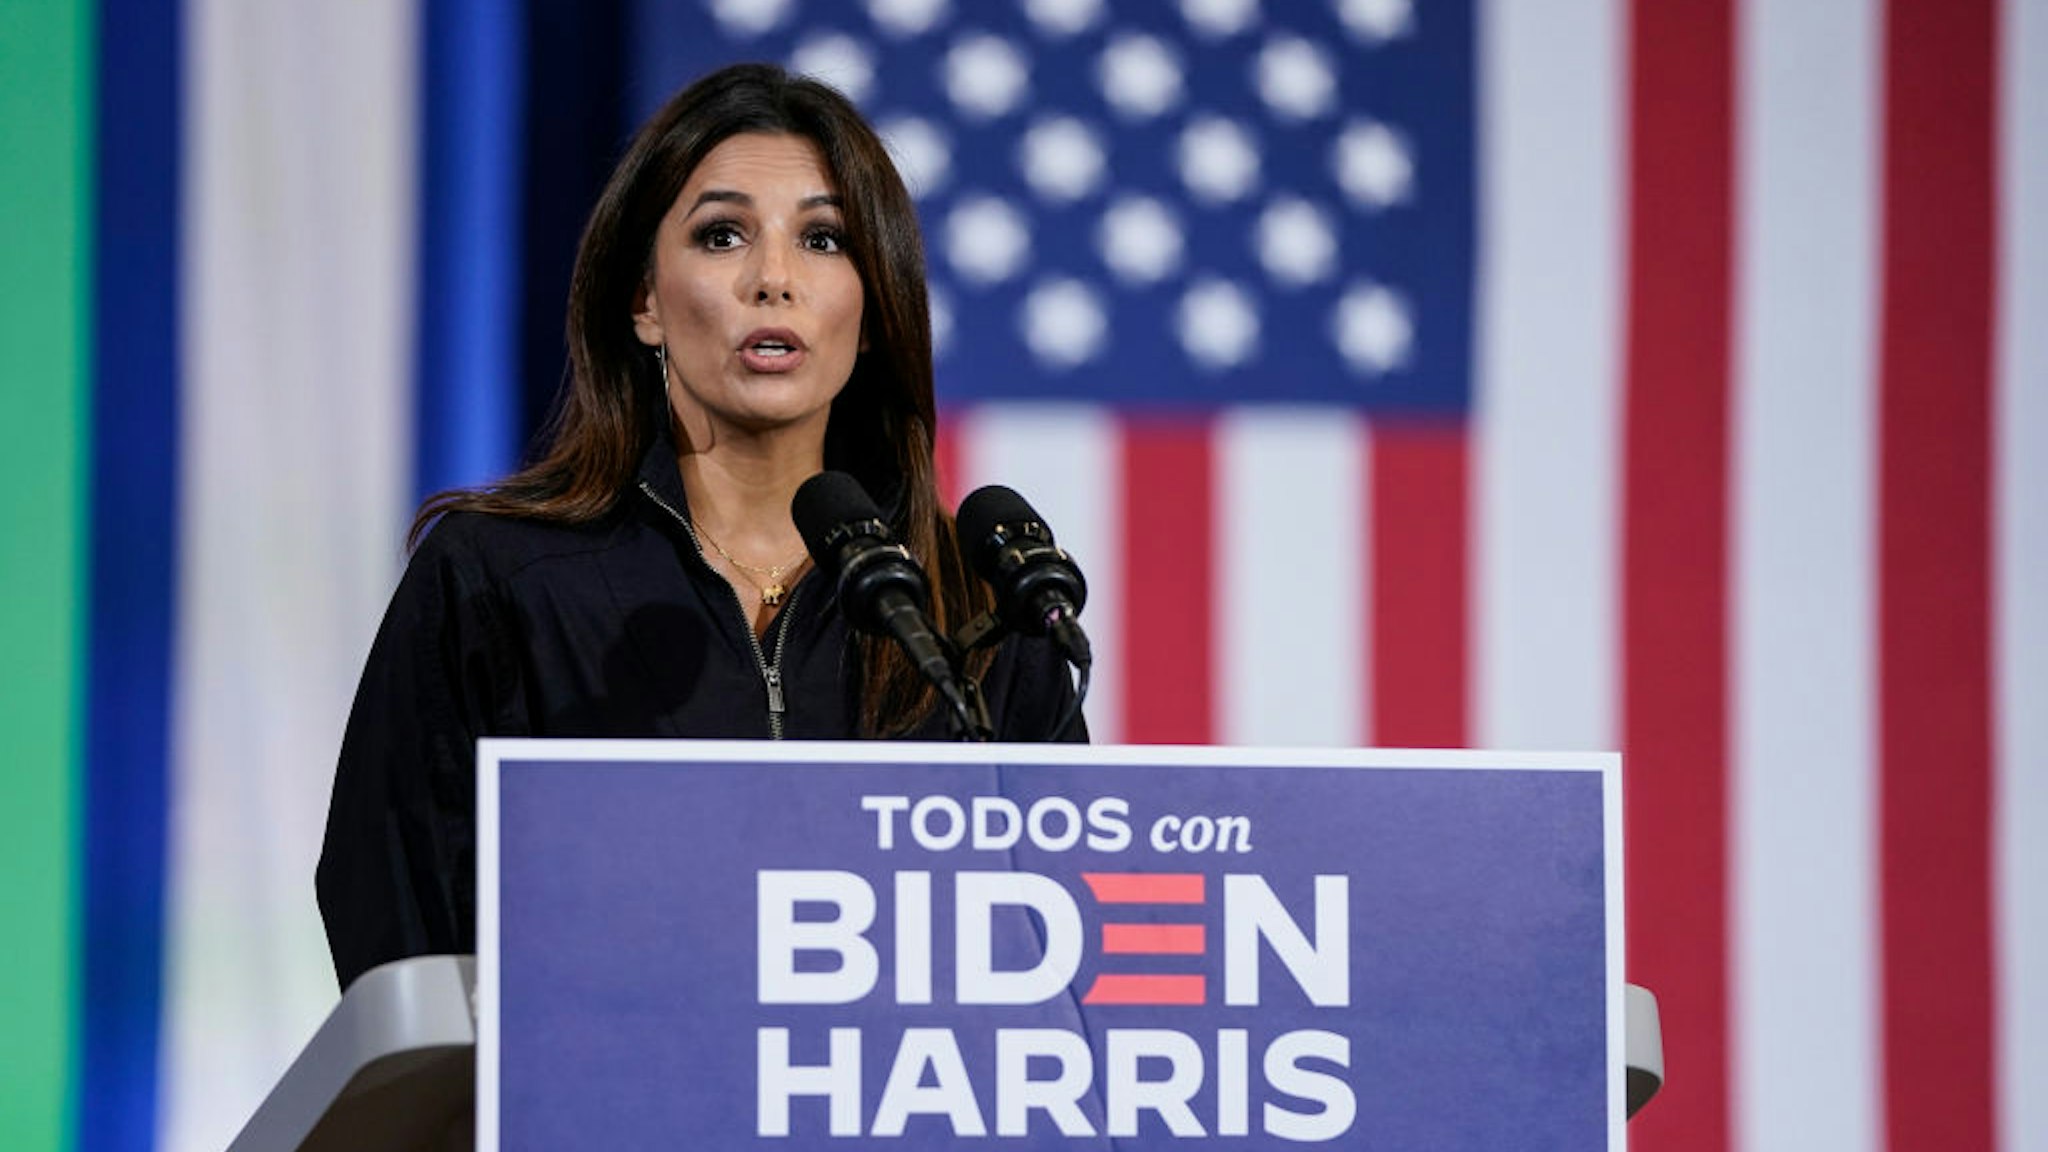 Actress Eva Longoria speaks at a Hispanic heritage event with Democratic presidential nominee and former Vice President Joe Biden at Osceola Heritage Park on September 15, 2020 in Kissimmee, Florida.